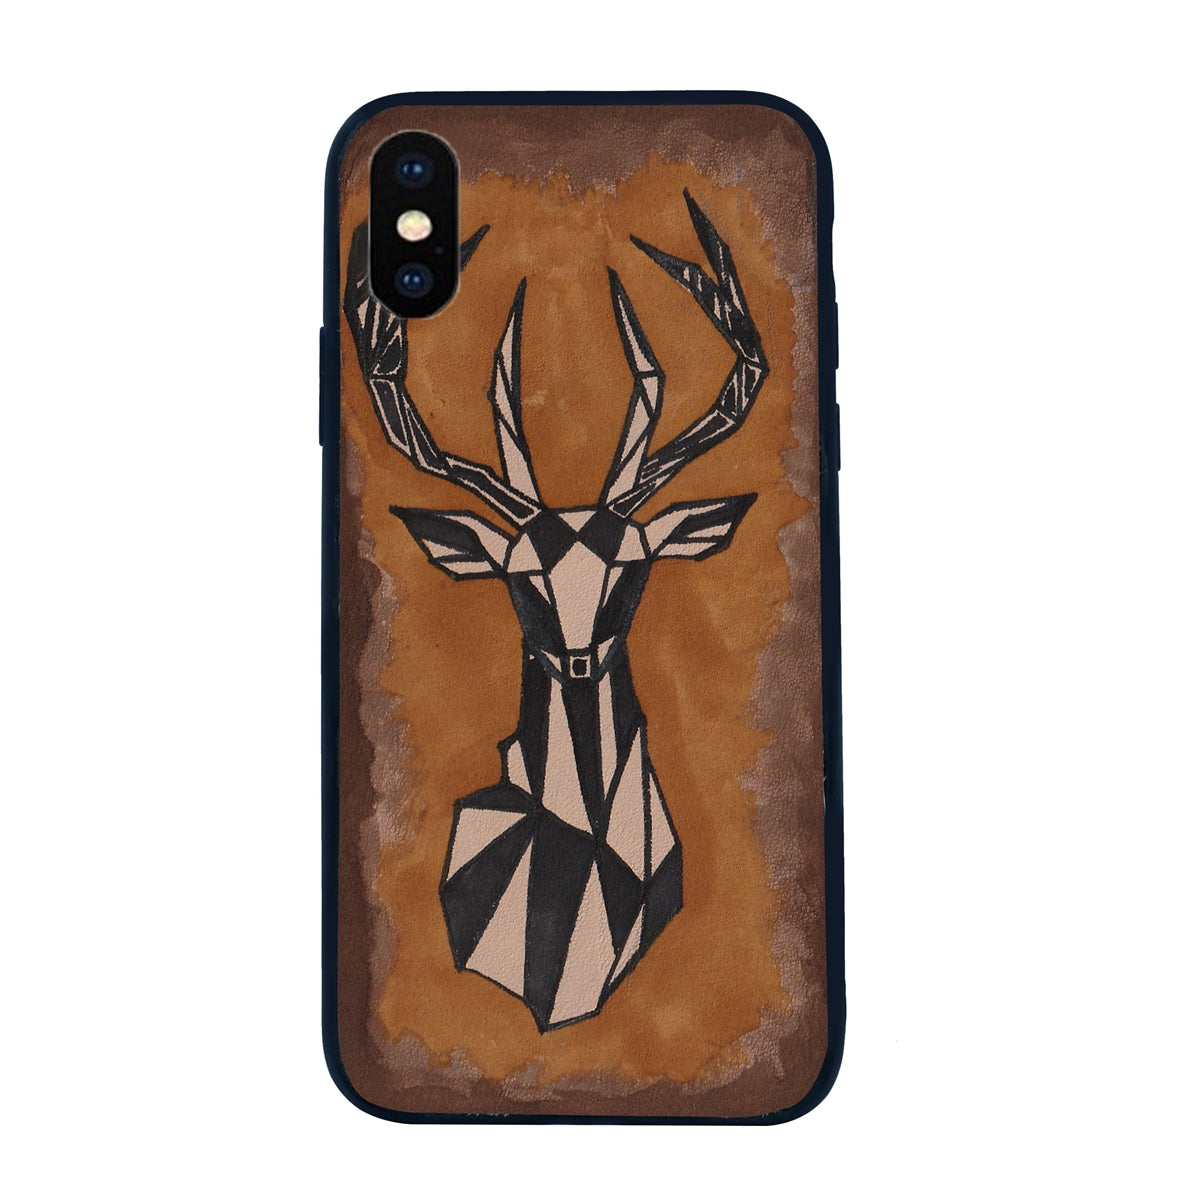 Hand Painted Deer Leather Mobile Cover by Brune & Bareskin